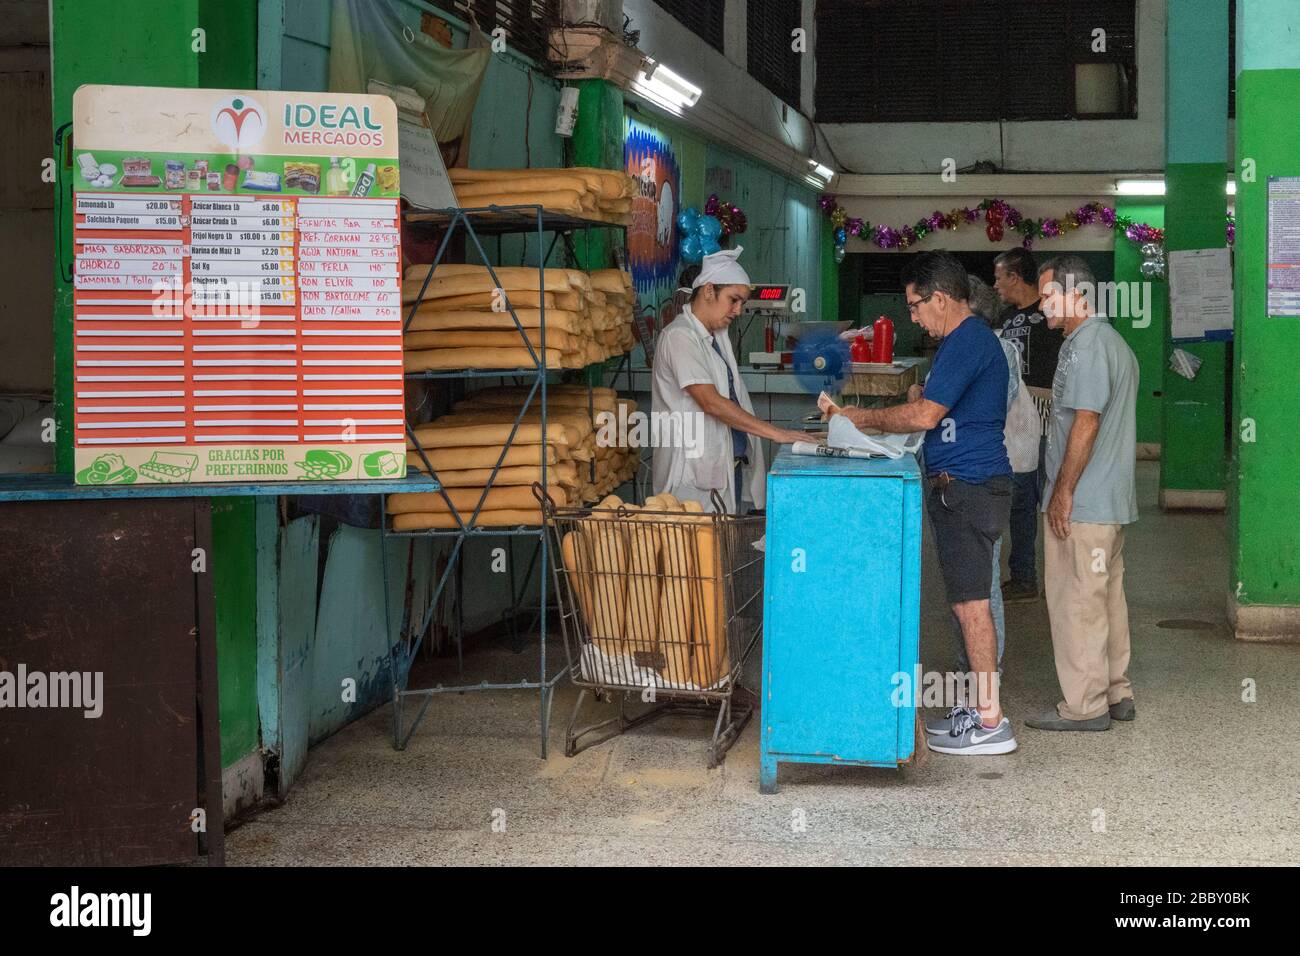 People buying bead from a government shop, Havana Stock Photo